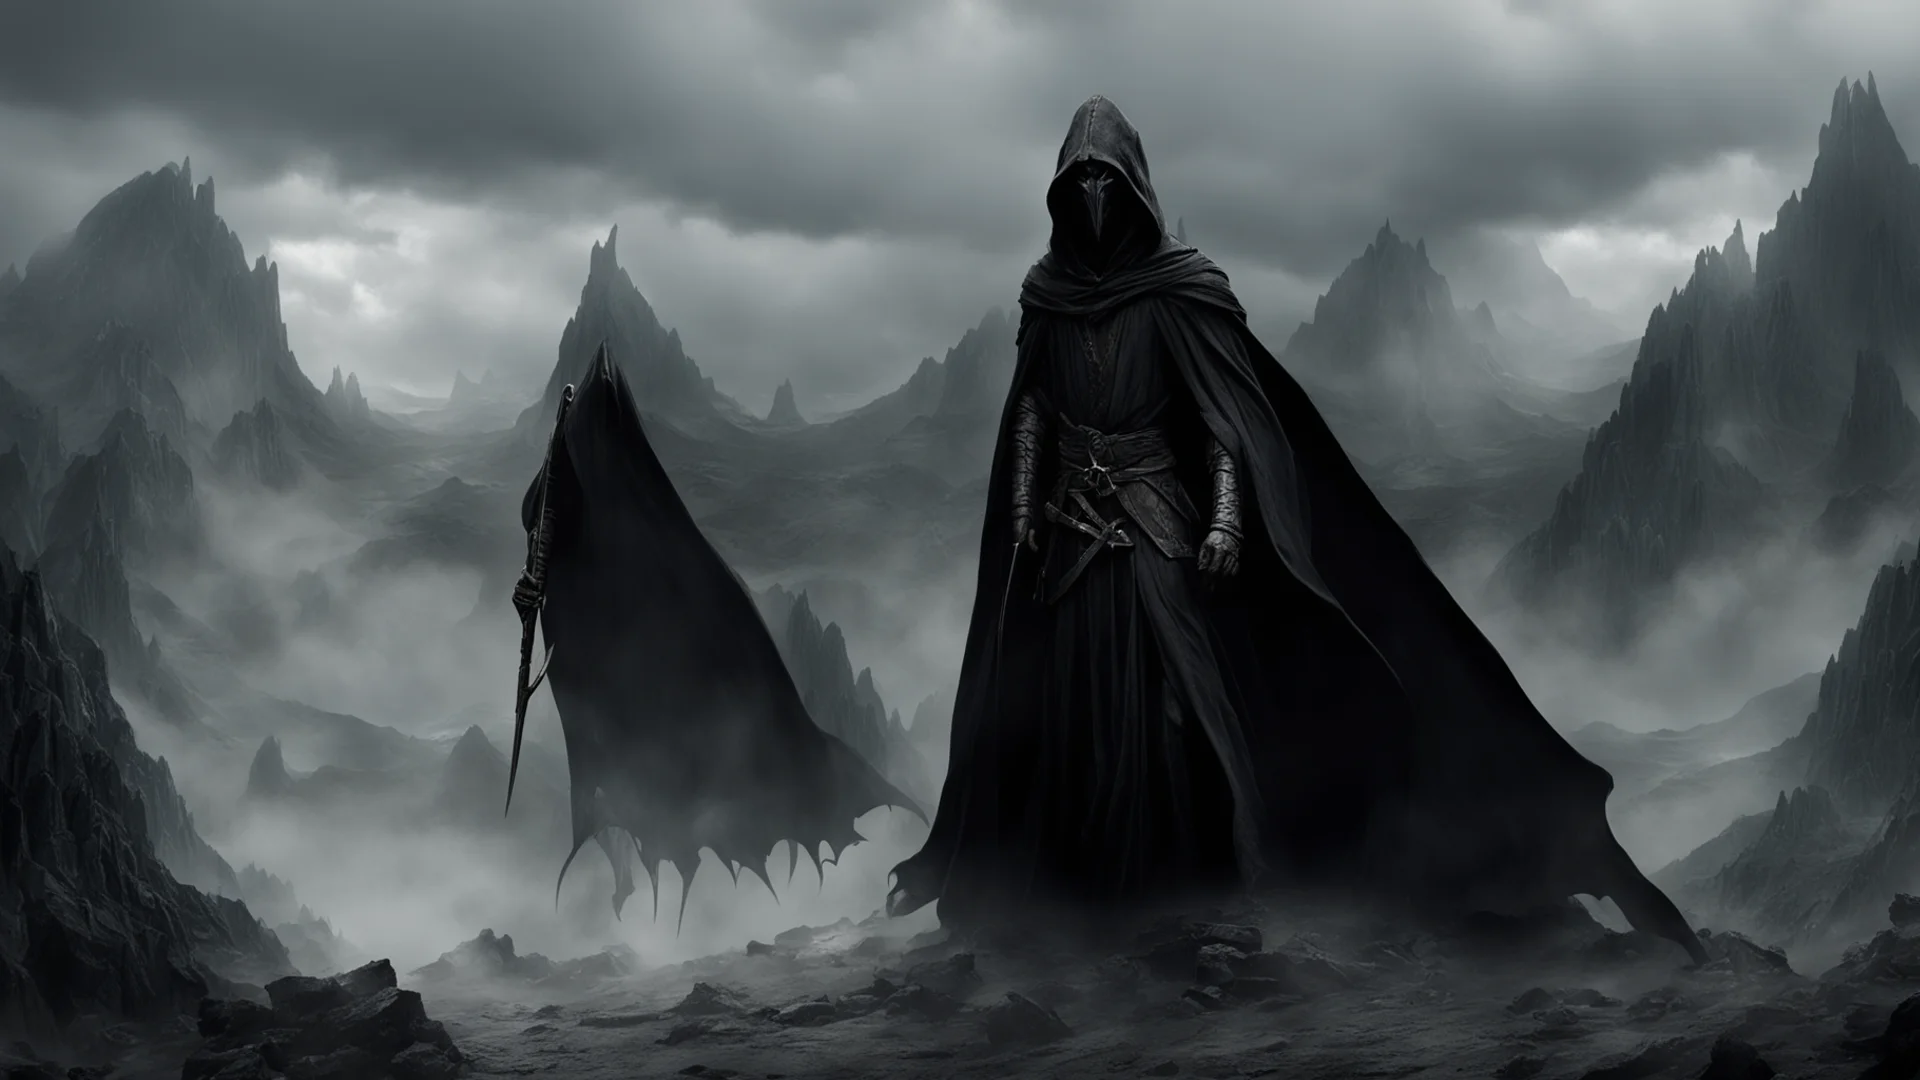 aimiddle earth nazgul amazing awesome portrait 2 wide